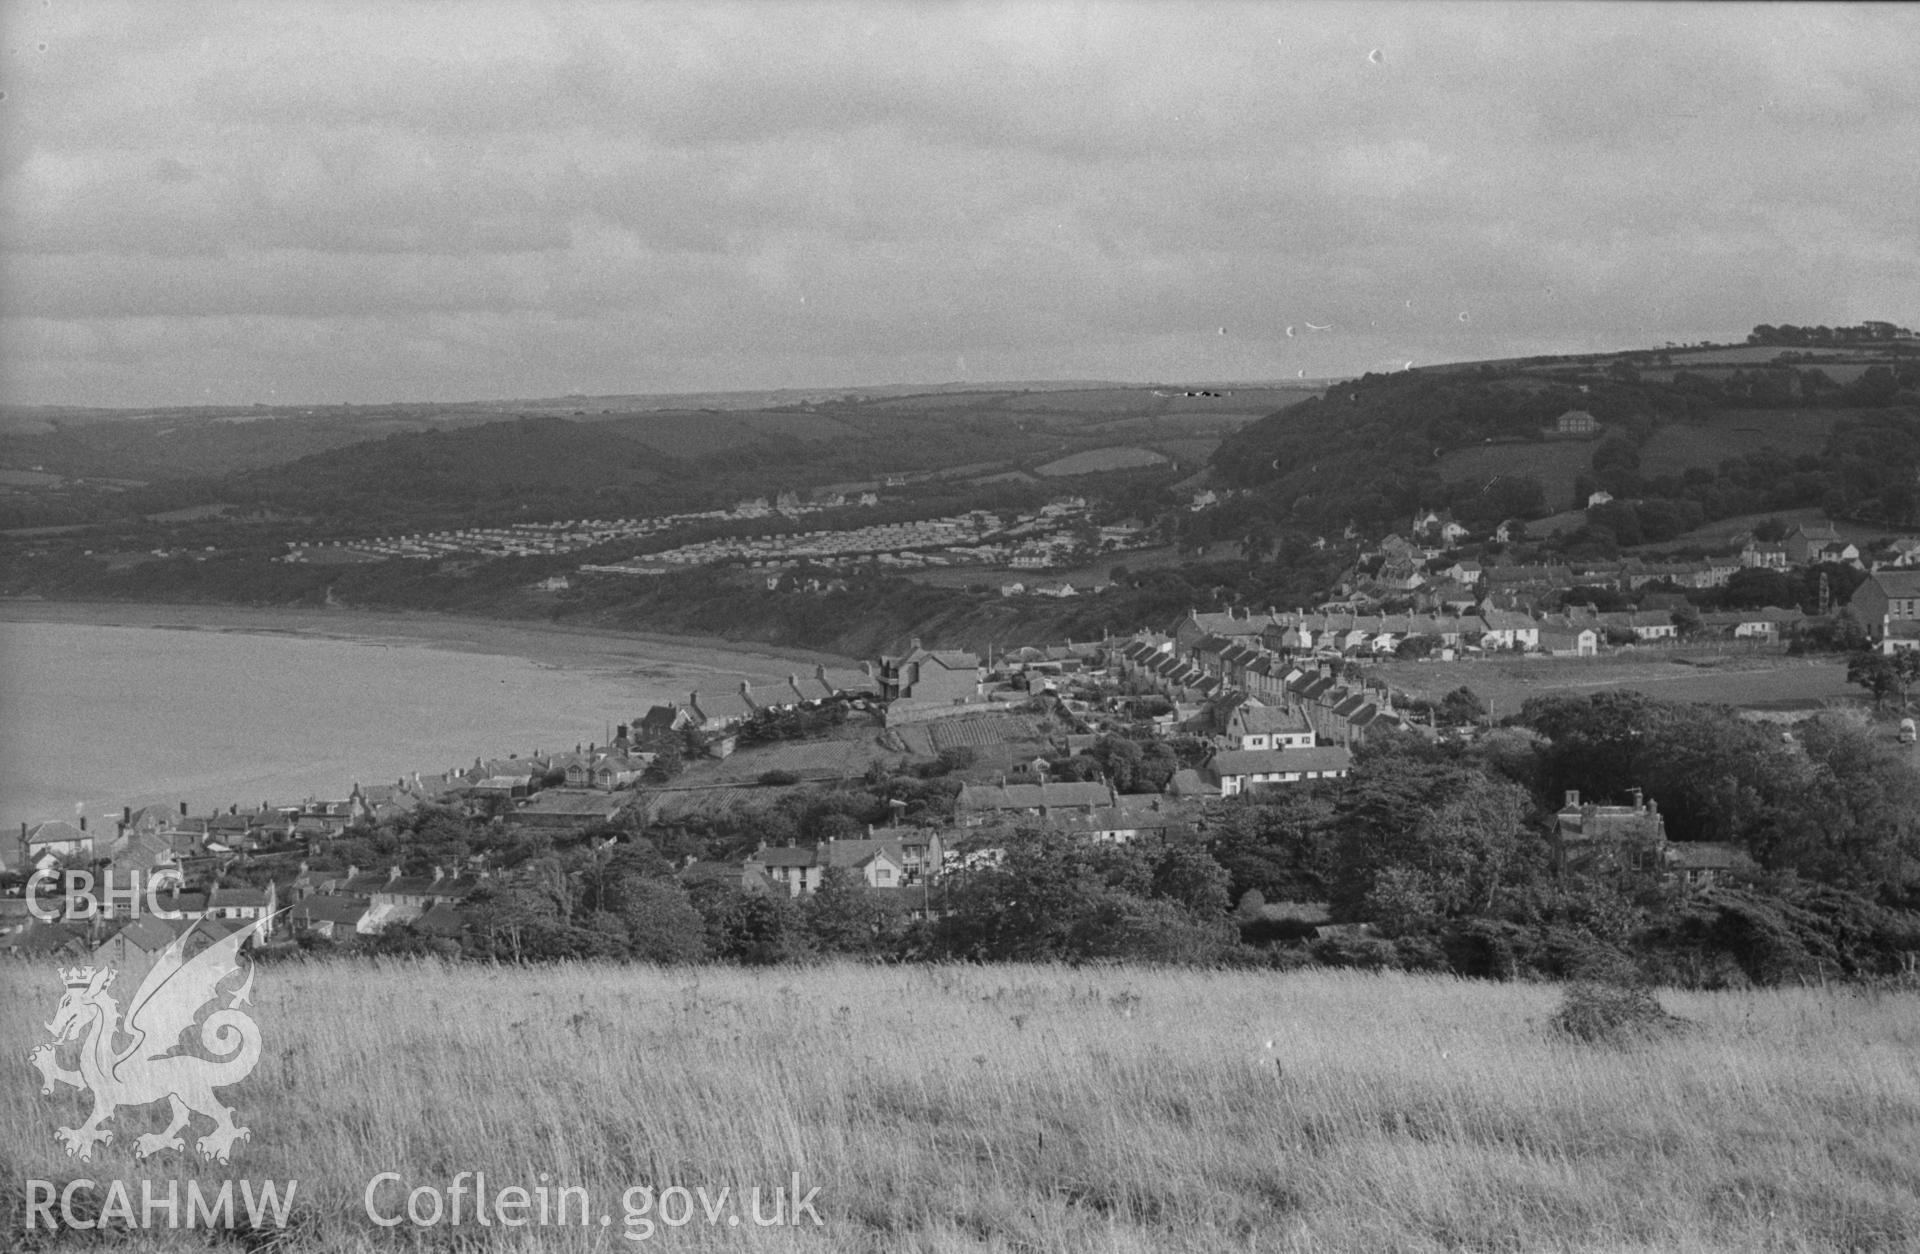 Digital copy of a black and white negative showing New Quay from near the Signal Station on New Quay Head. Photographed by Arthur O. Chater in September 1964 from Grid Reference SN 385 603, looking south east.